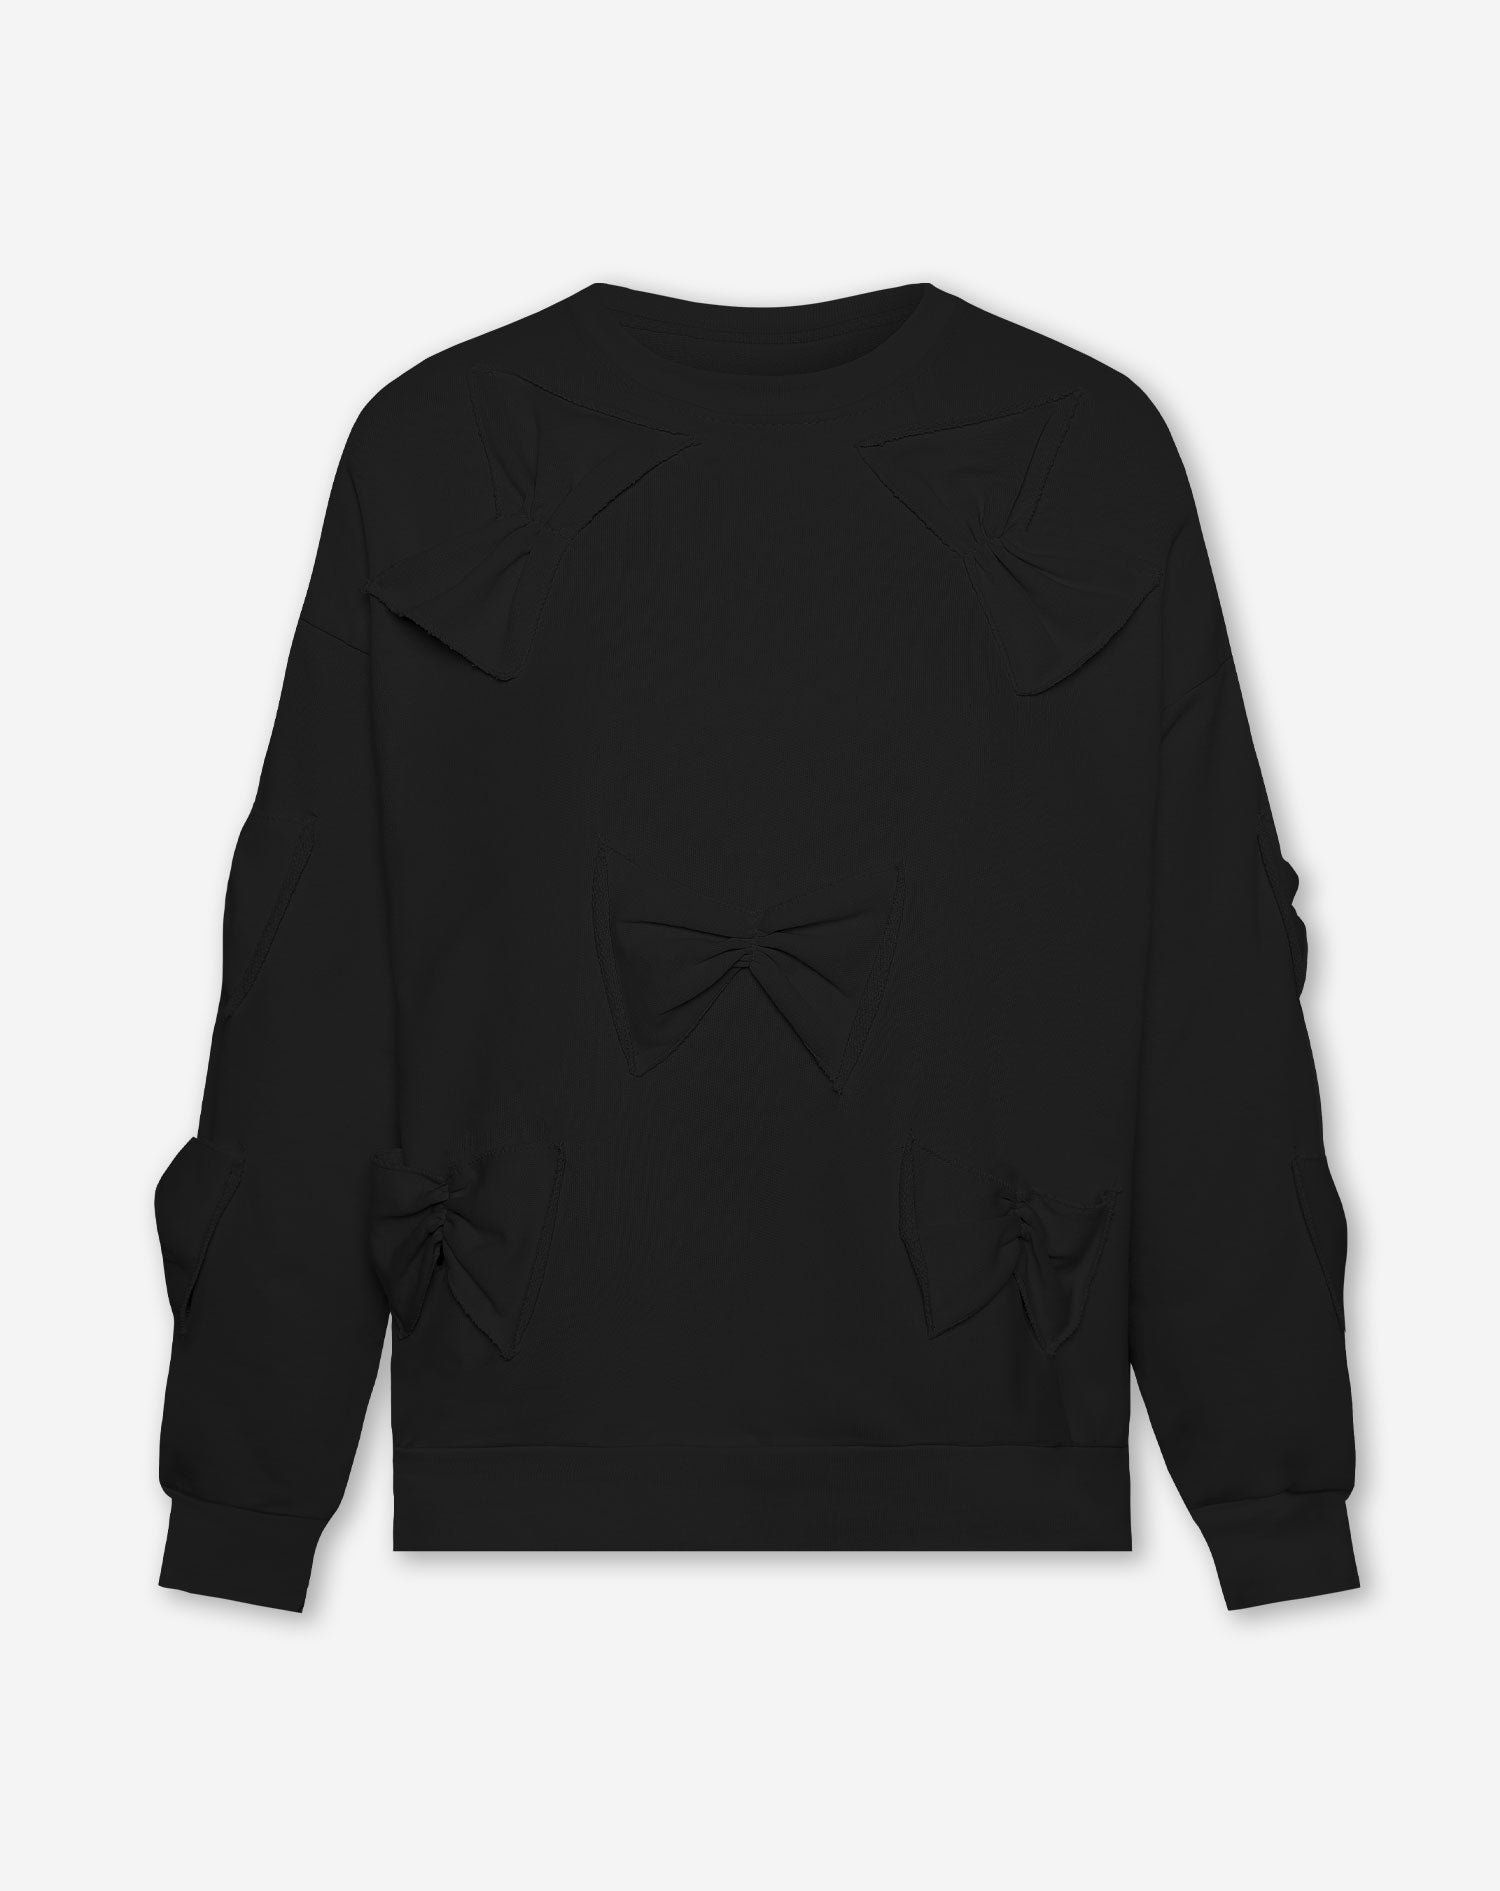 SMALL BOWS SWEATER BLACK